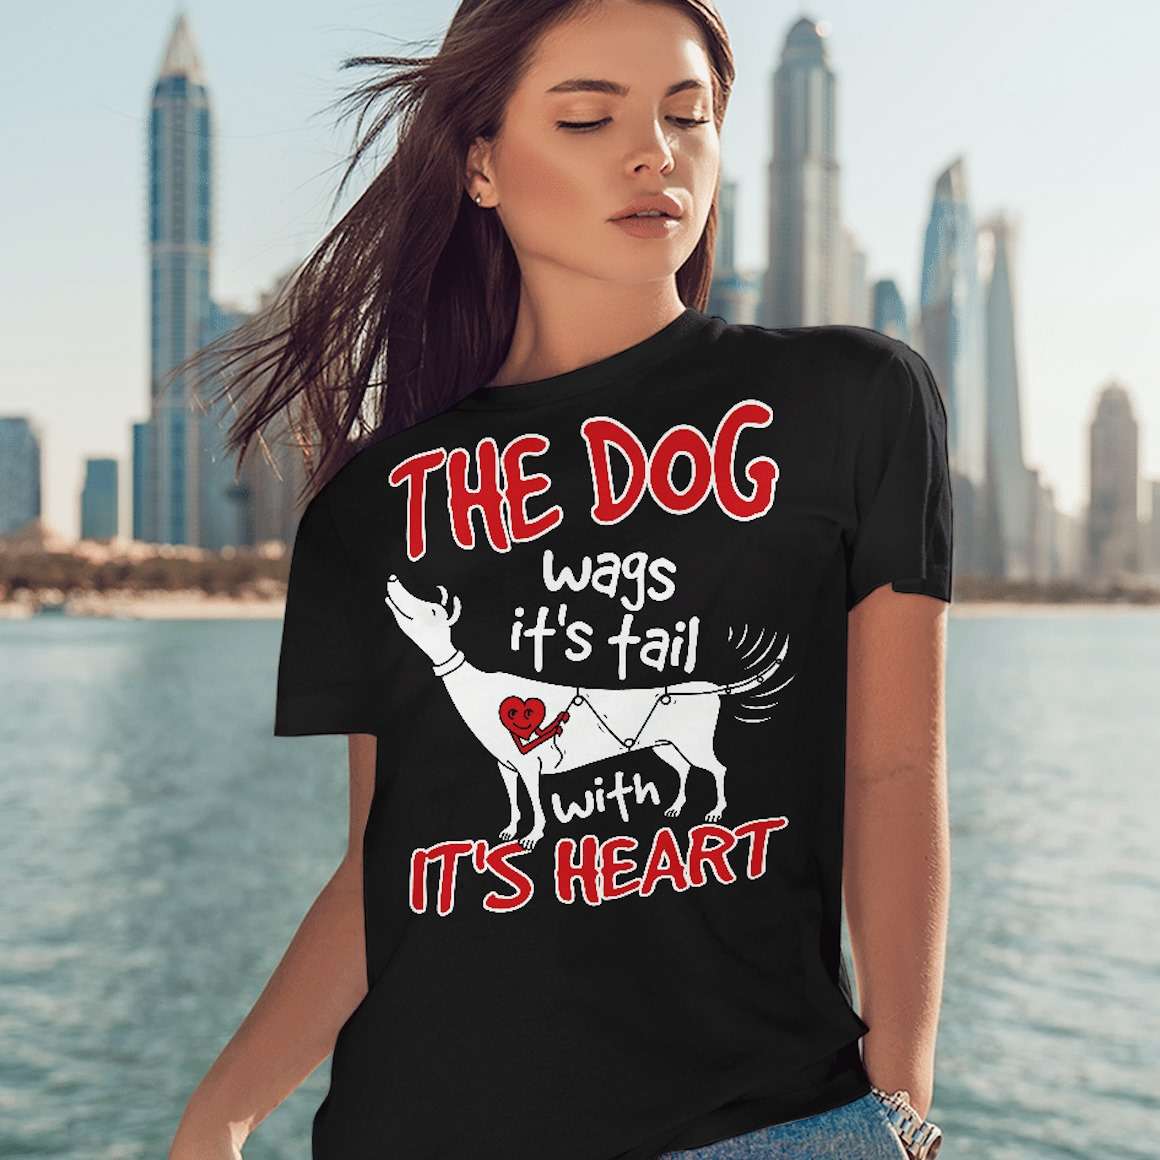 The dog wags it's tail with it's heart - Dog wags tail to owner, dog lover